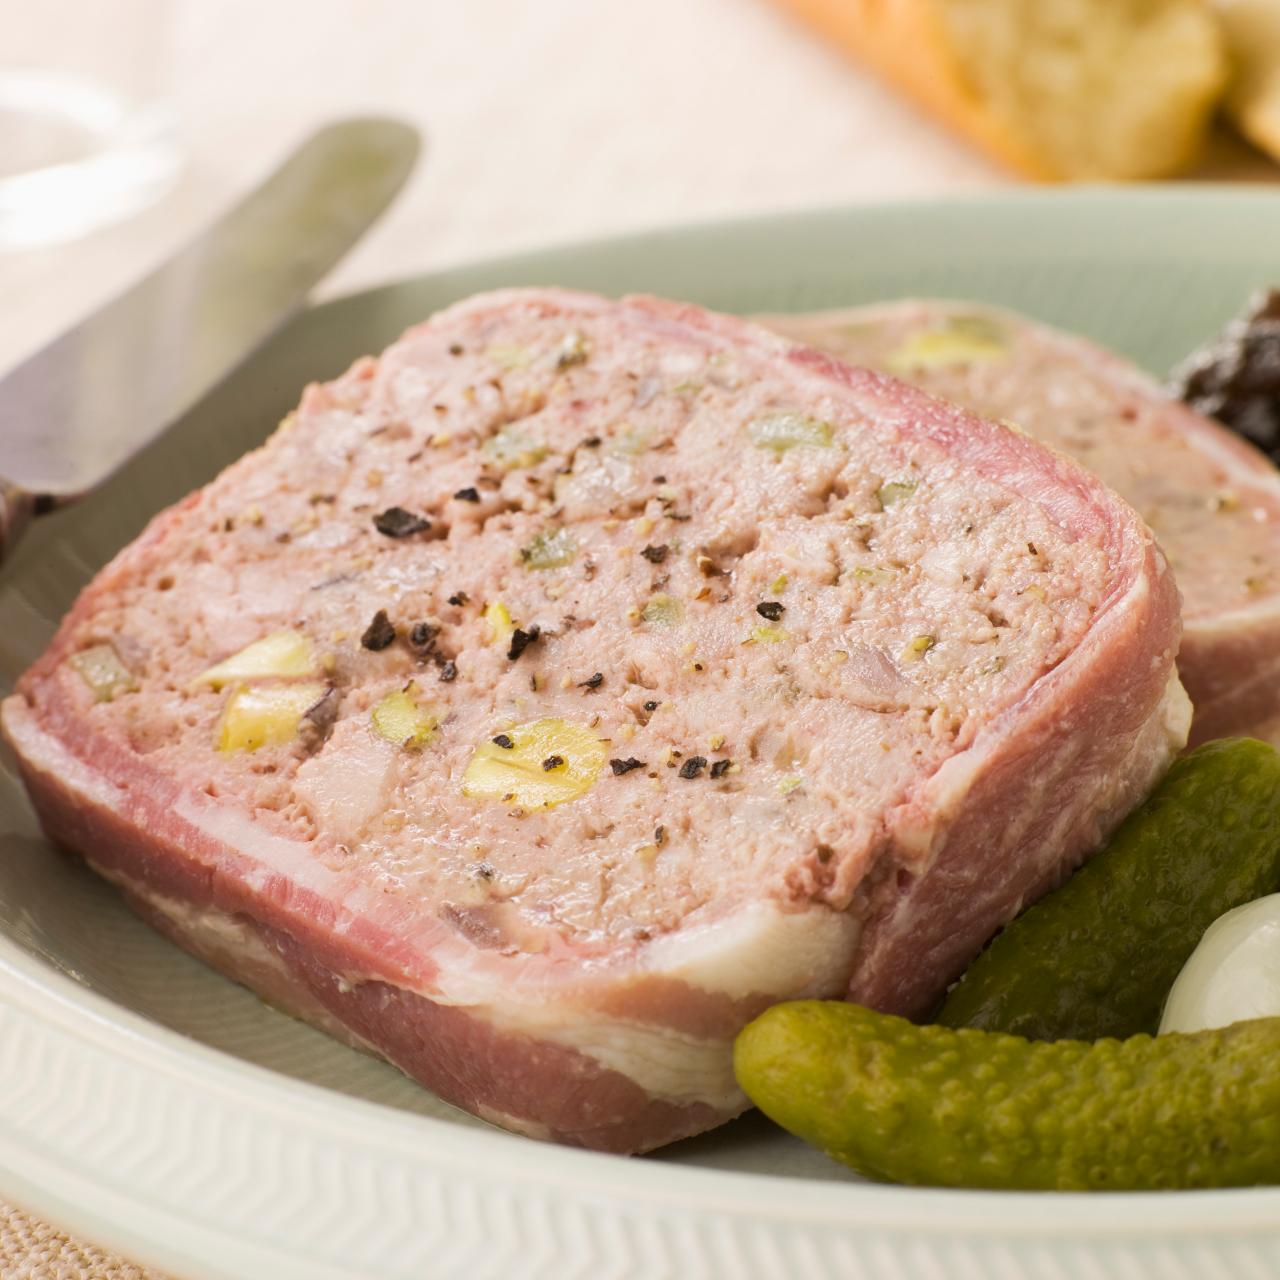 Traditional French Coarse Country Pâté Recipe